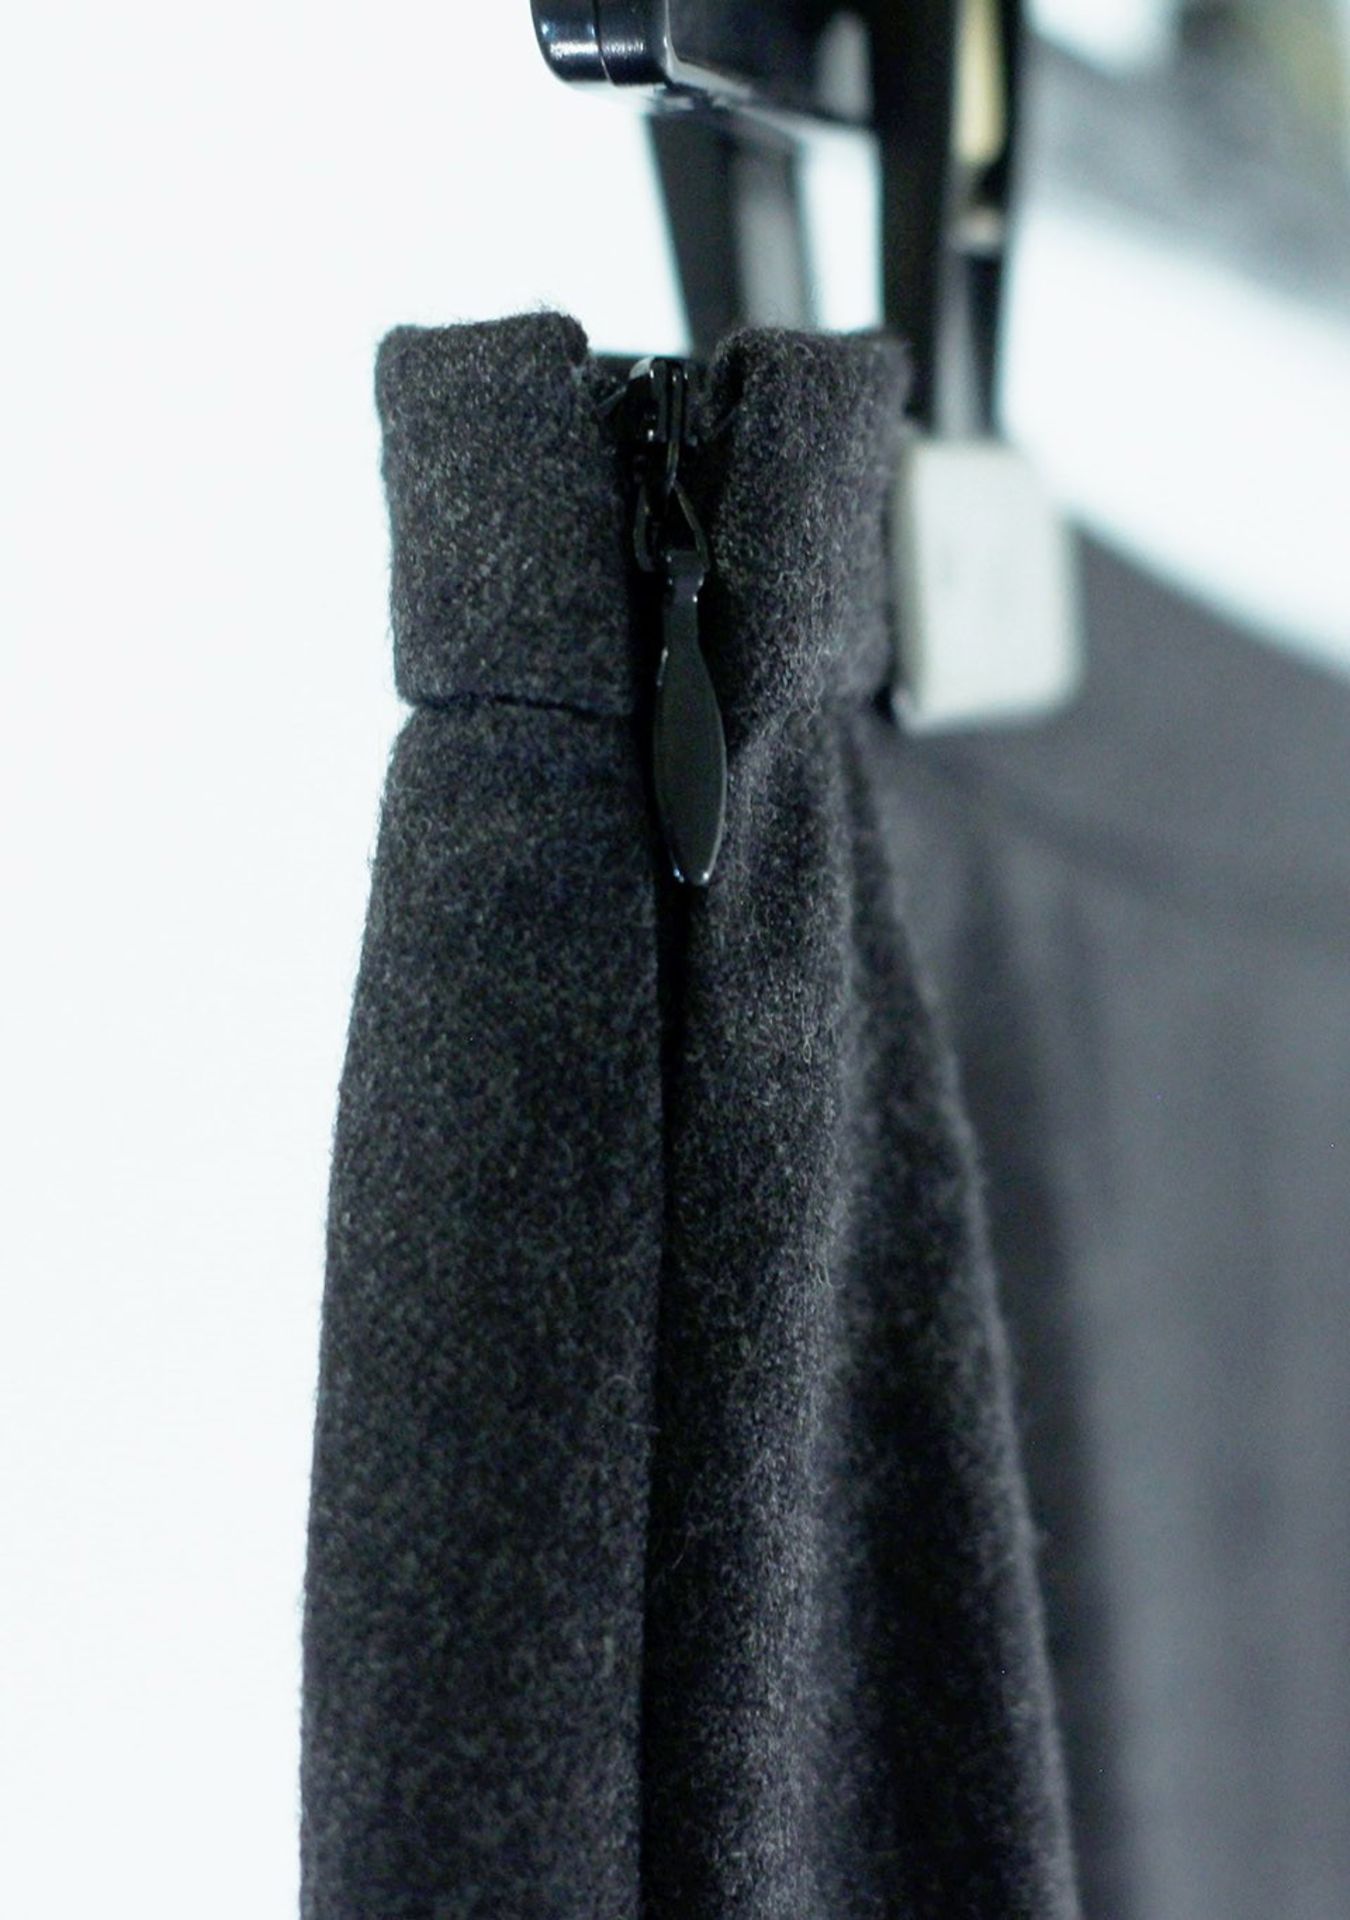 1 x Anne Belin Dark Grey Skirt - Size: 18 - Material: 100% Wool - From a High End Clothing - Image 5 of 9